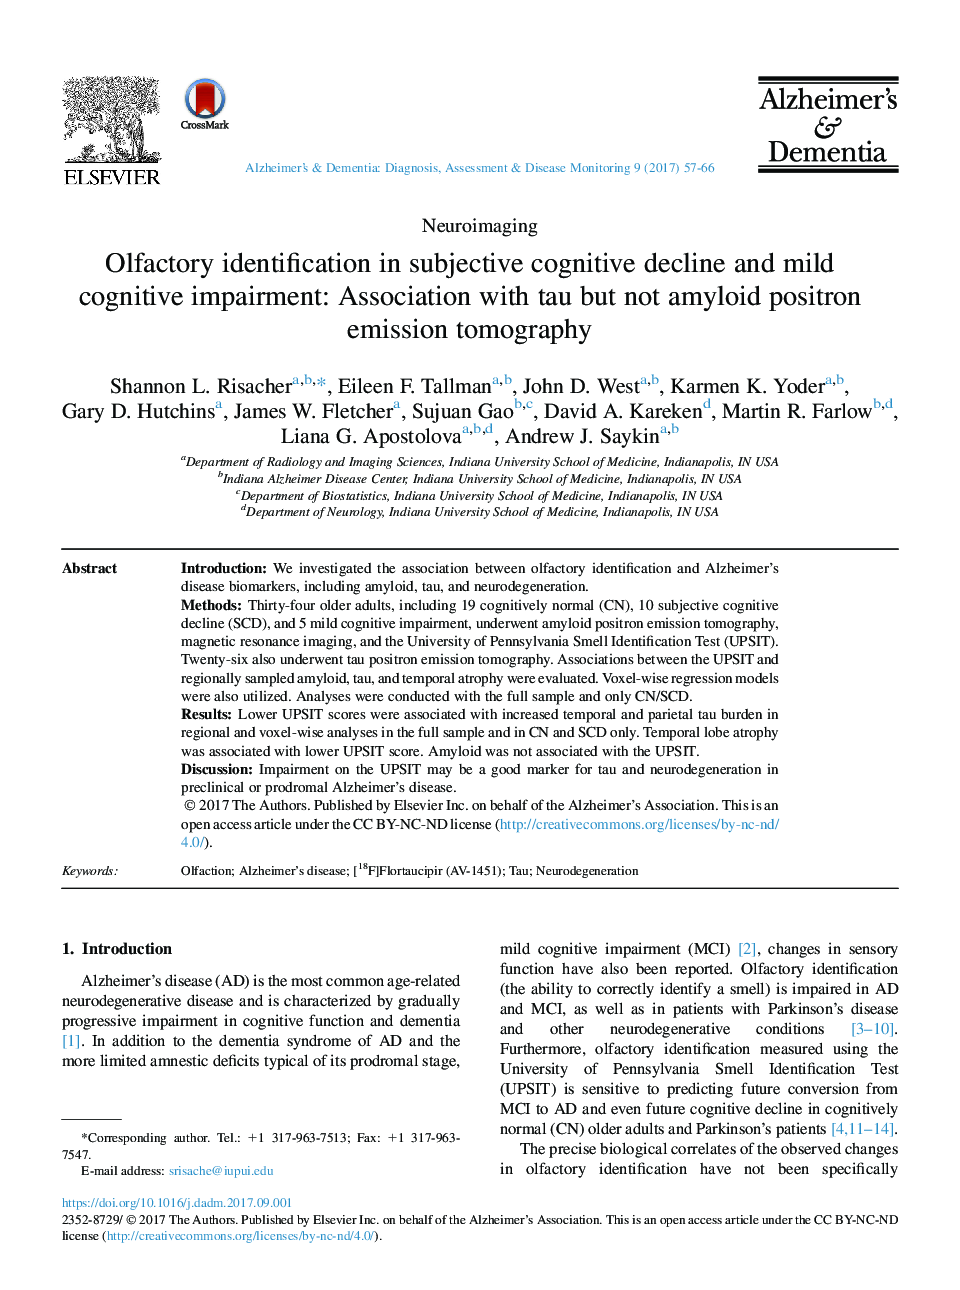 Olfactory identification in subjective cognitive decline and mild cognitive impairment: Association with tau but not amyloid positron emission tomography